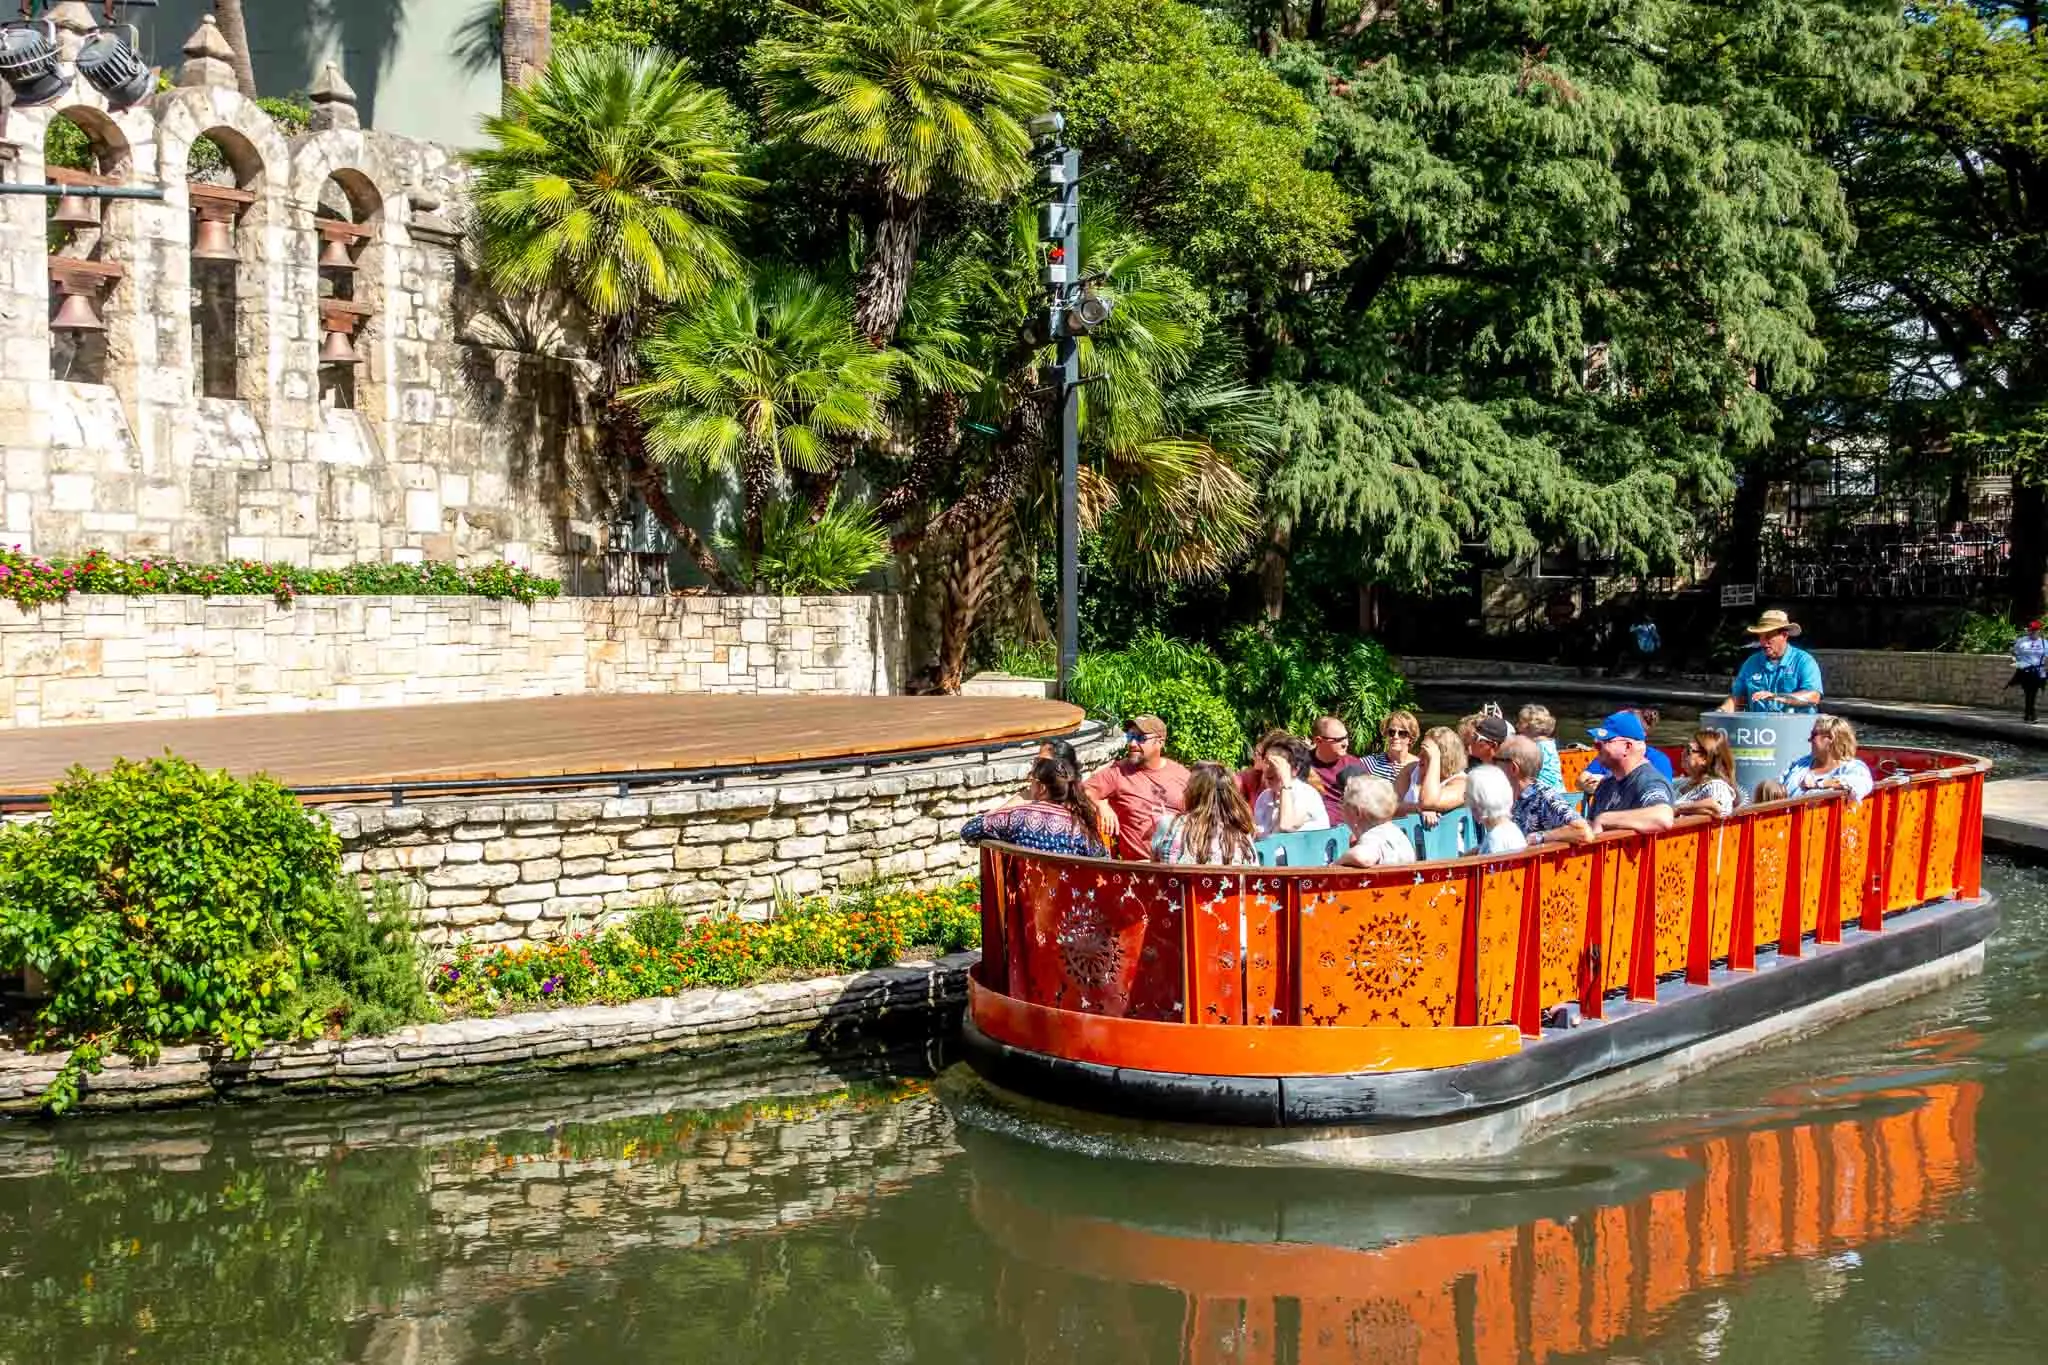 People in an orange barge cruising the river on a weekend in San Antonio Texas.